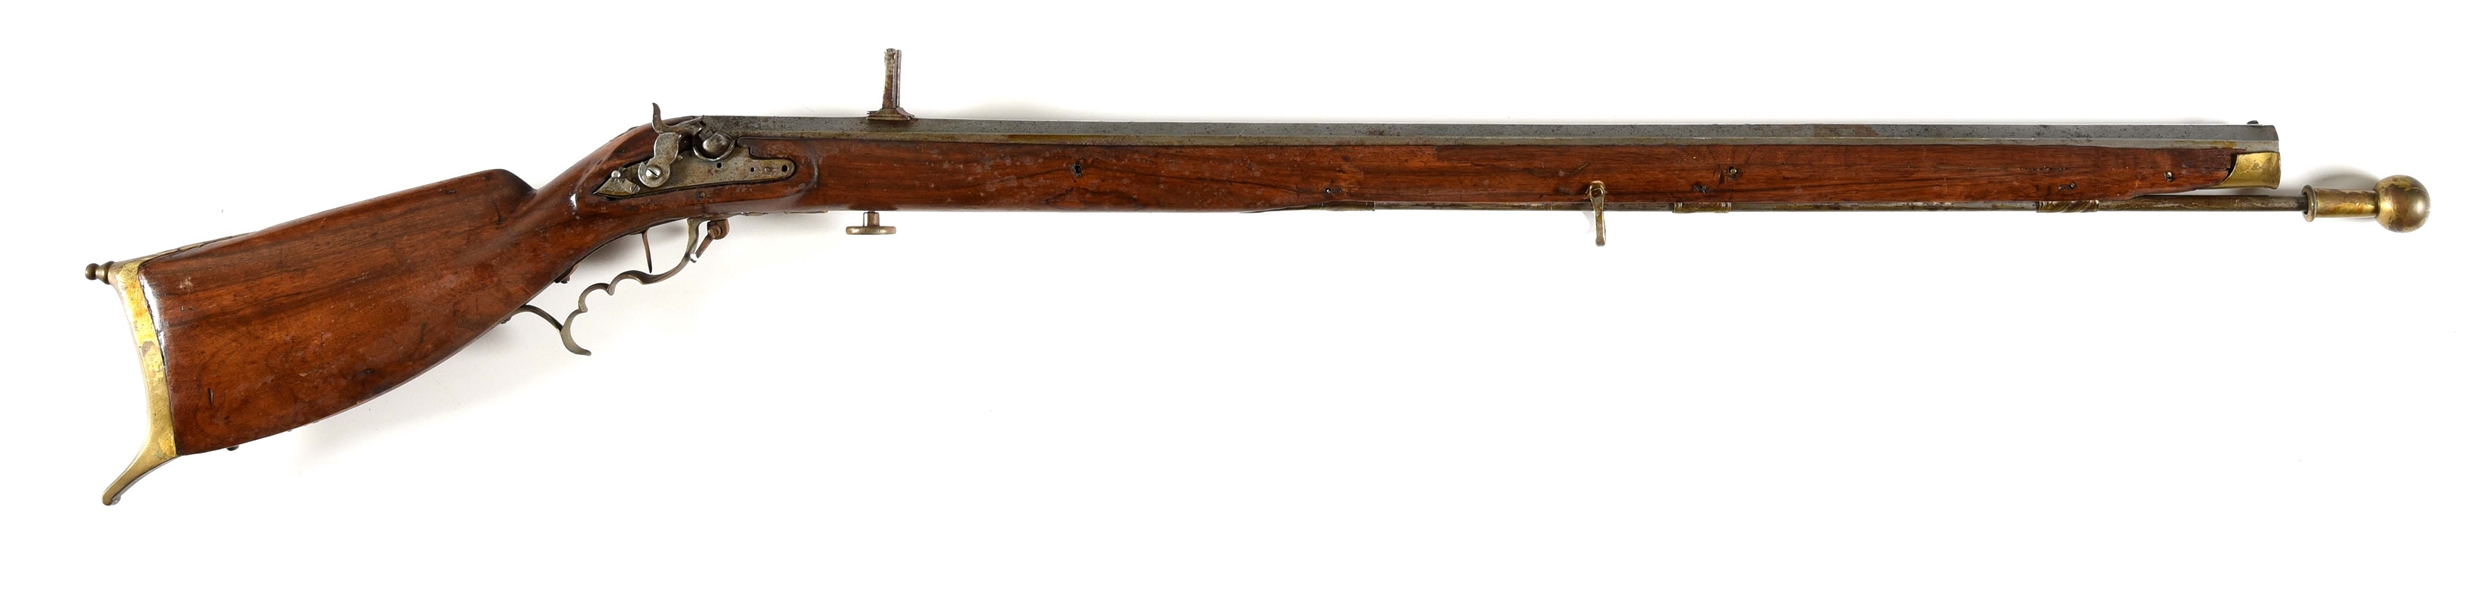 (A) MENTELER SIGNED SWISS TARGET RIFLE WITH PERCUSSION DOG LOCK.